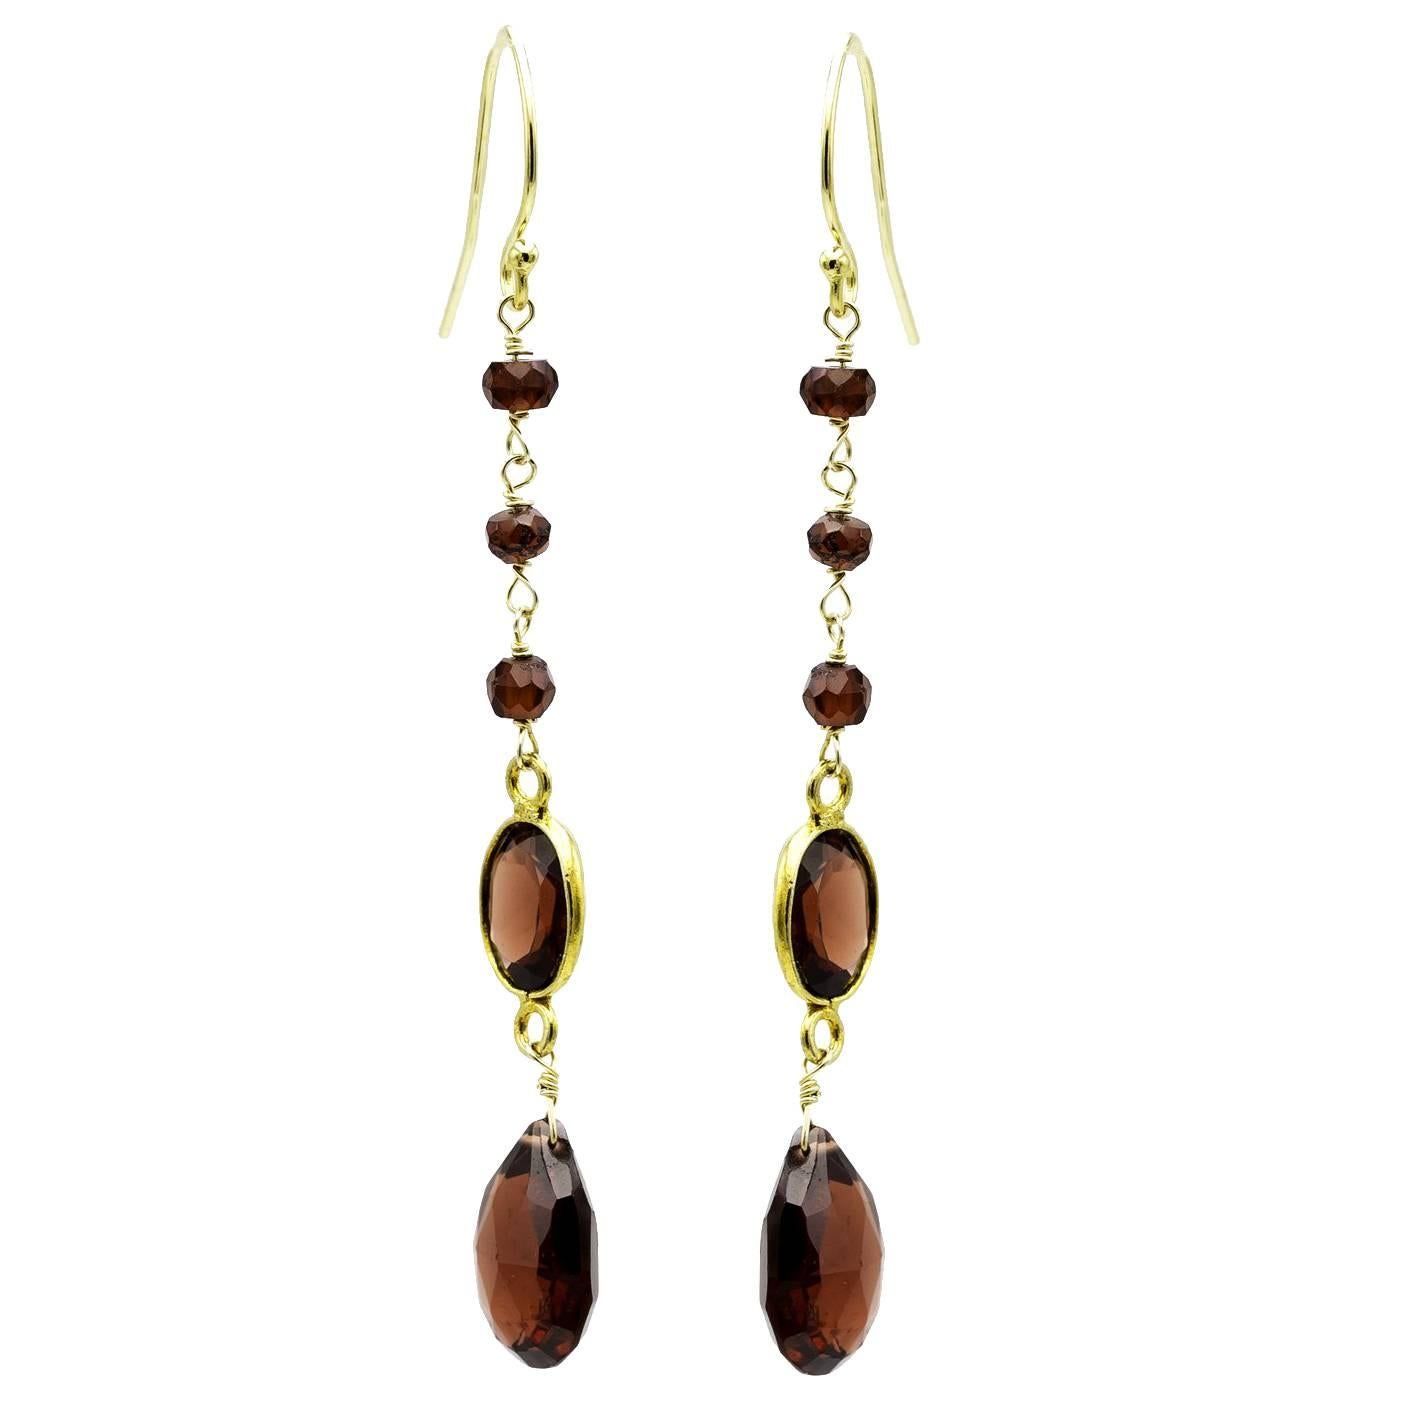 Faceted Garnet and Gold Dangling Earrings in a Tapered Design